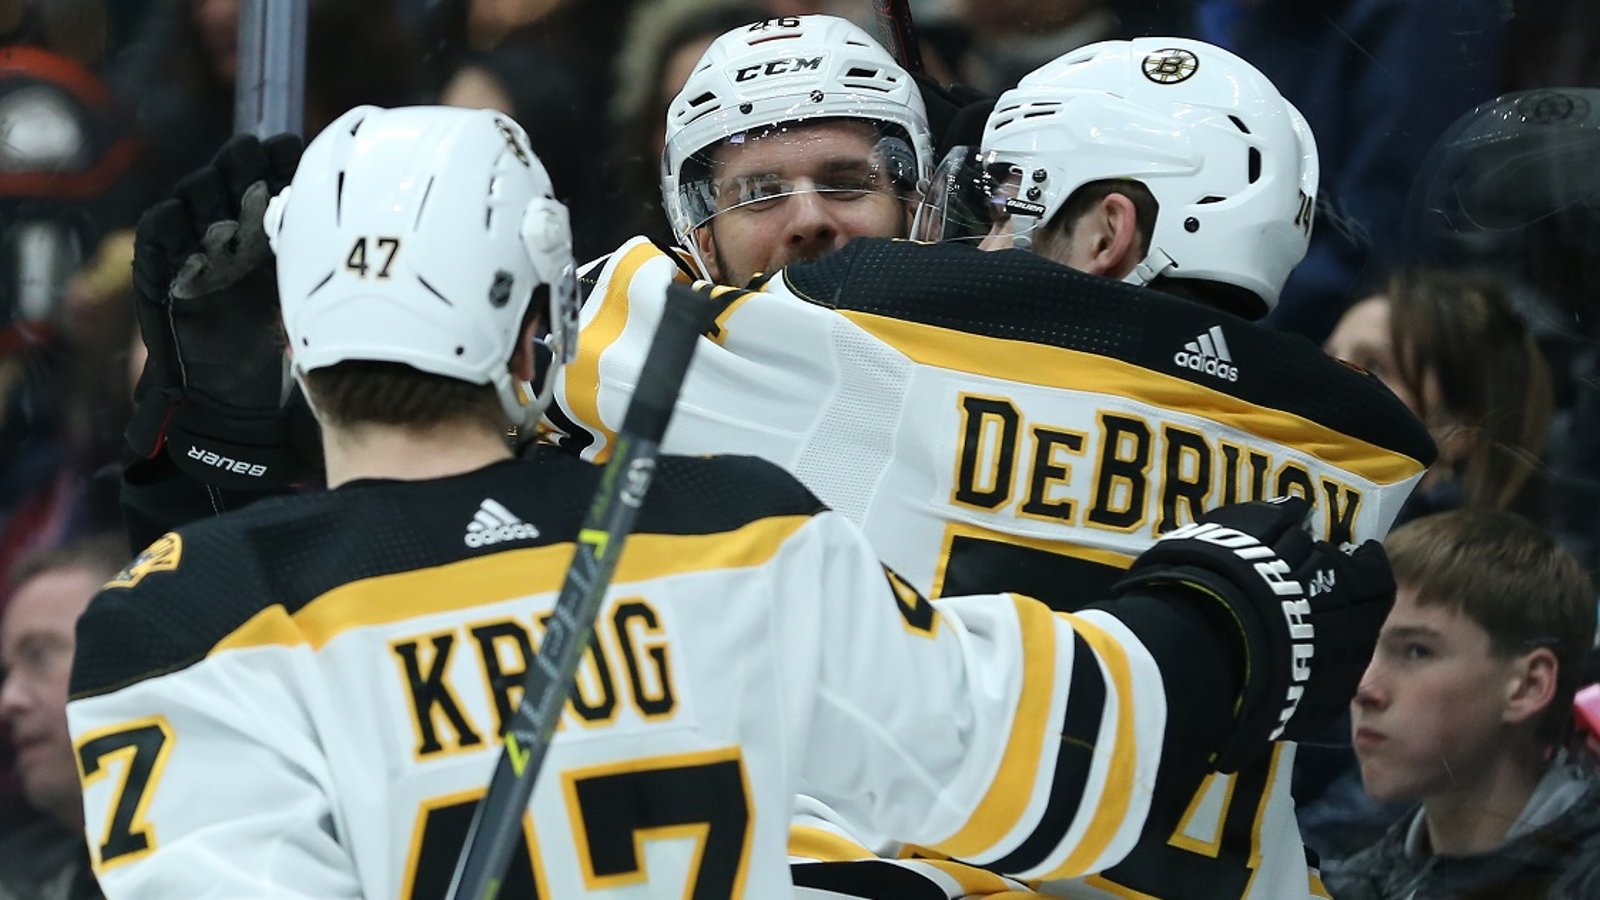 Rumor: David Krejci may not be ready to go for the start of the regular season.